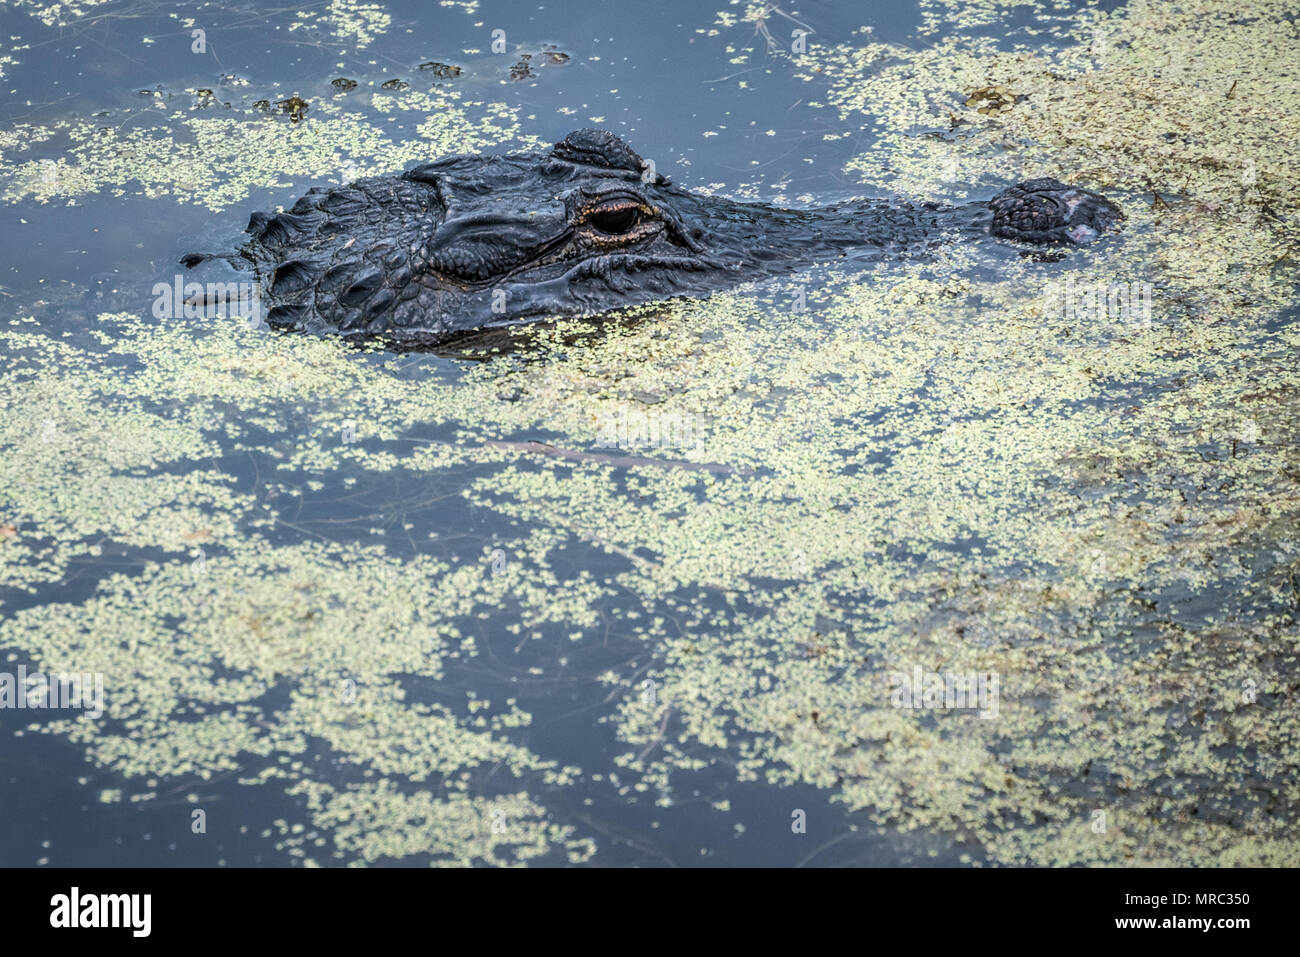 Florida alligator floating motionless in the algae covered water of the Guana River at Ponte Vedra Beach along Florida A1A. Stock Photo